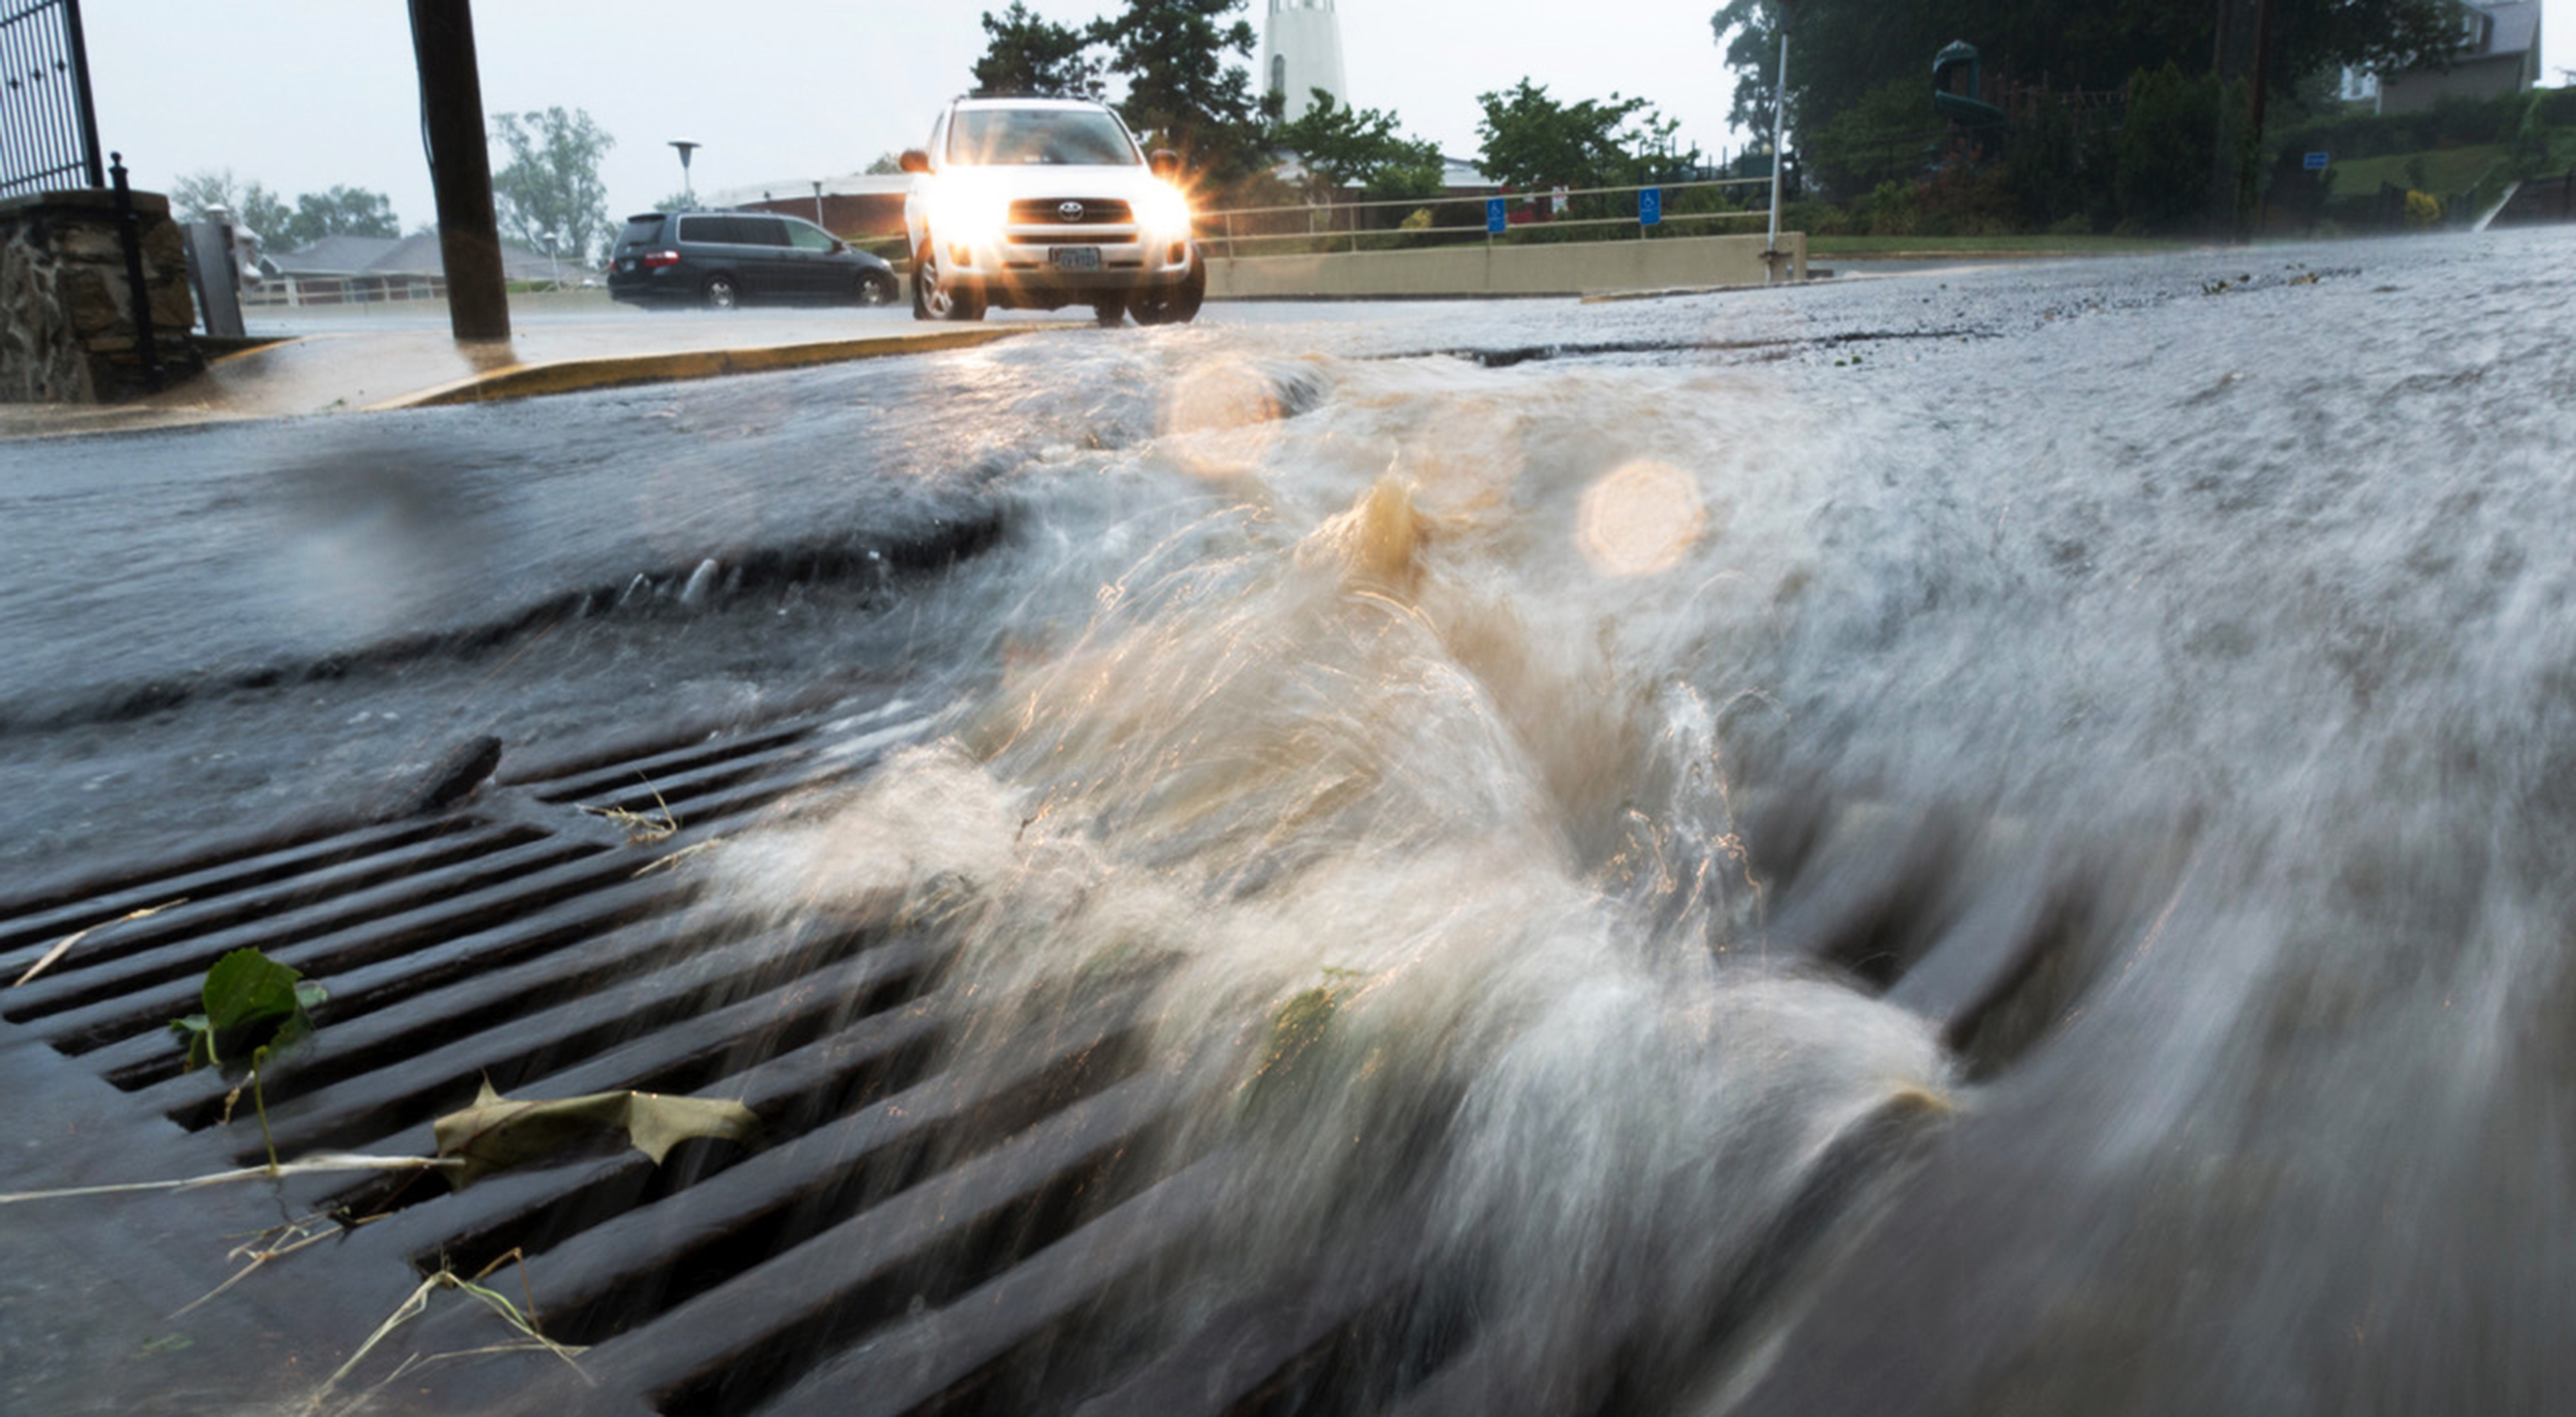 Storm water rushes down a city street into a storm drain. Cars in the background try to navigate the flooded street.